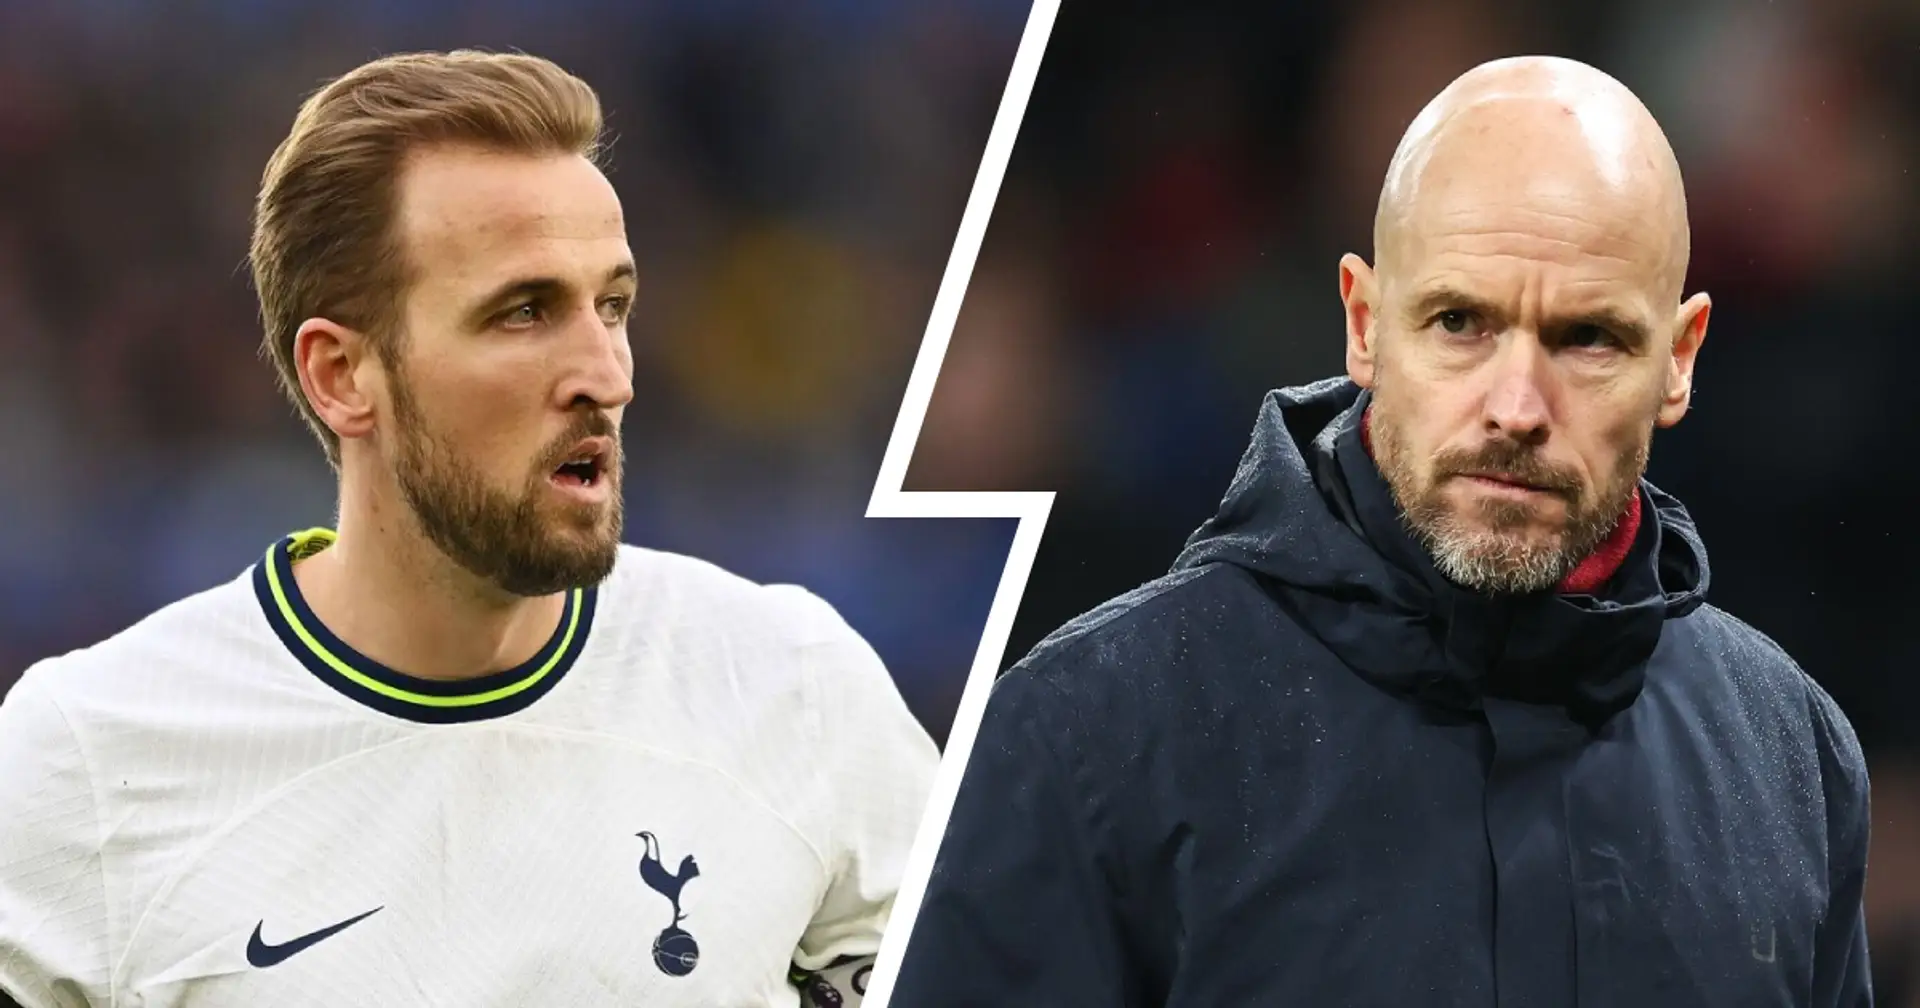 Ten Hag targeting 2 major summer signings - one could be Kane (reliability: 4 stars)